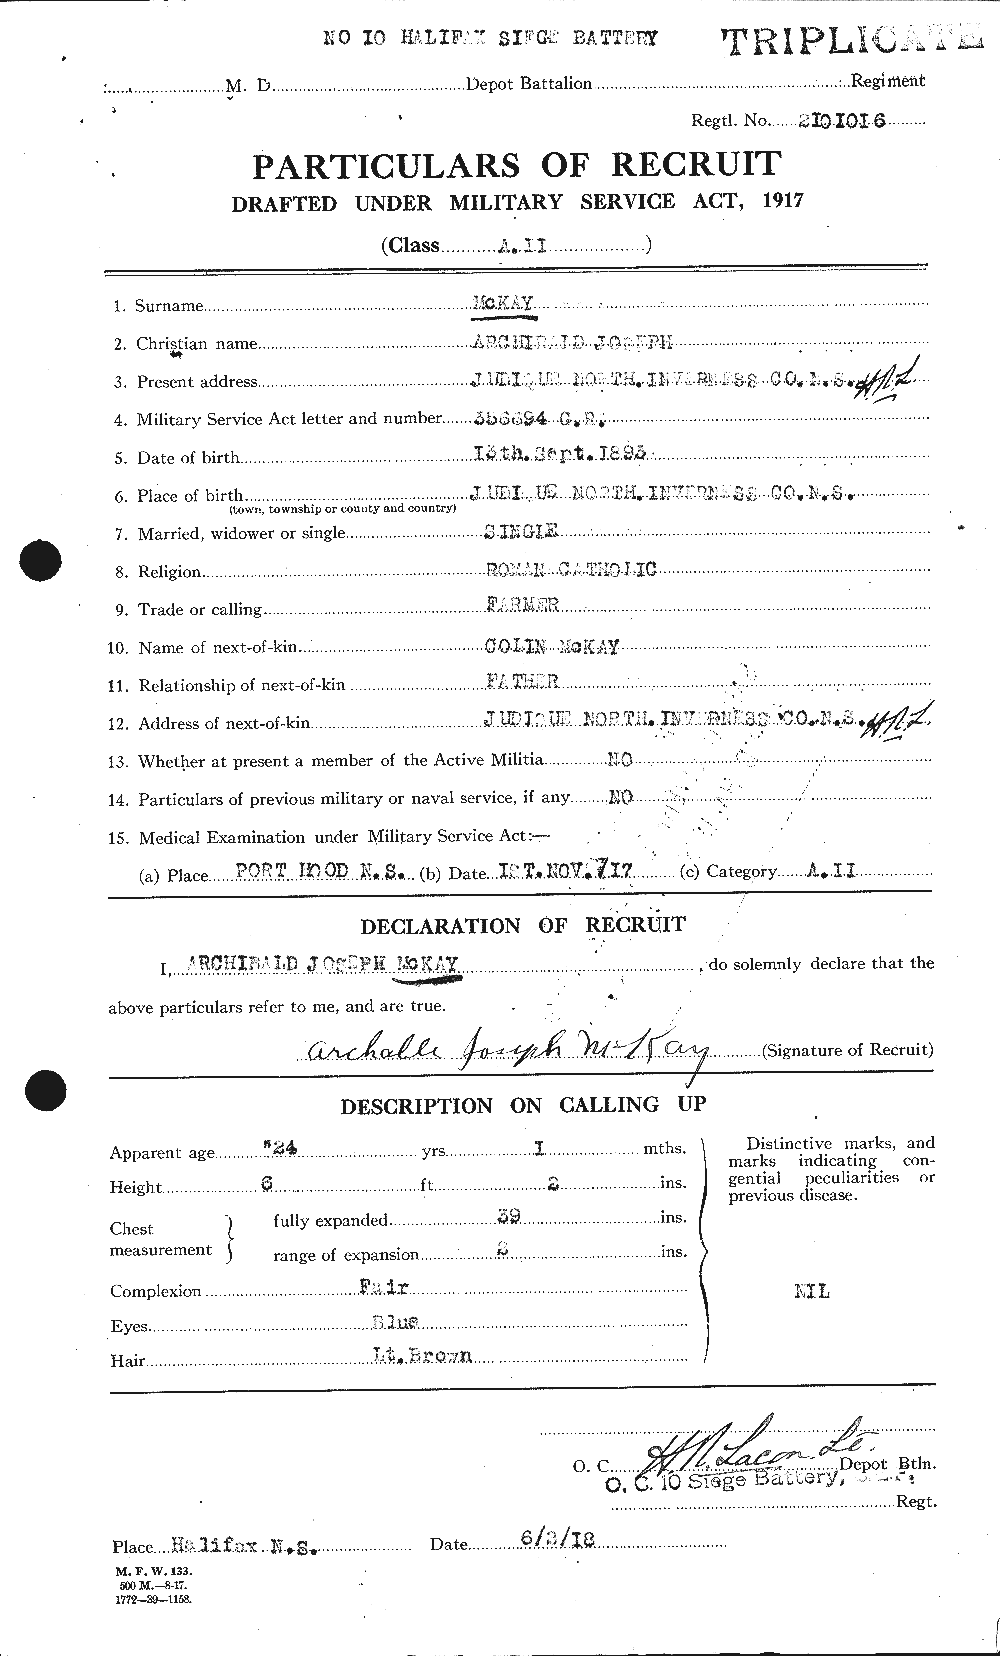 Personnel Records of the First World War - CEF 531018a